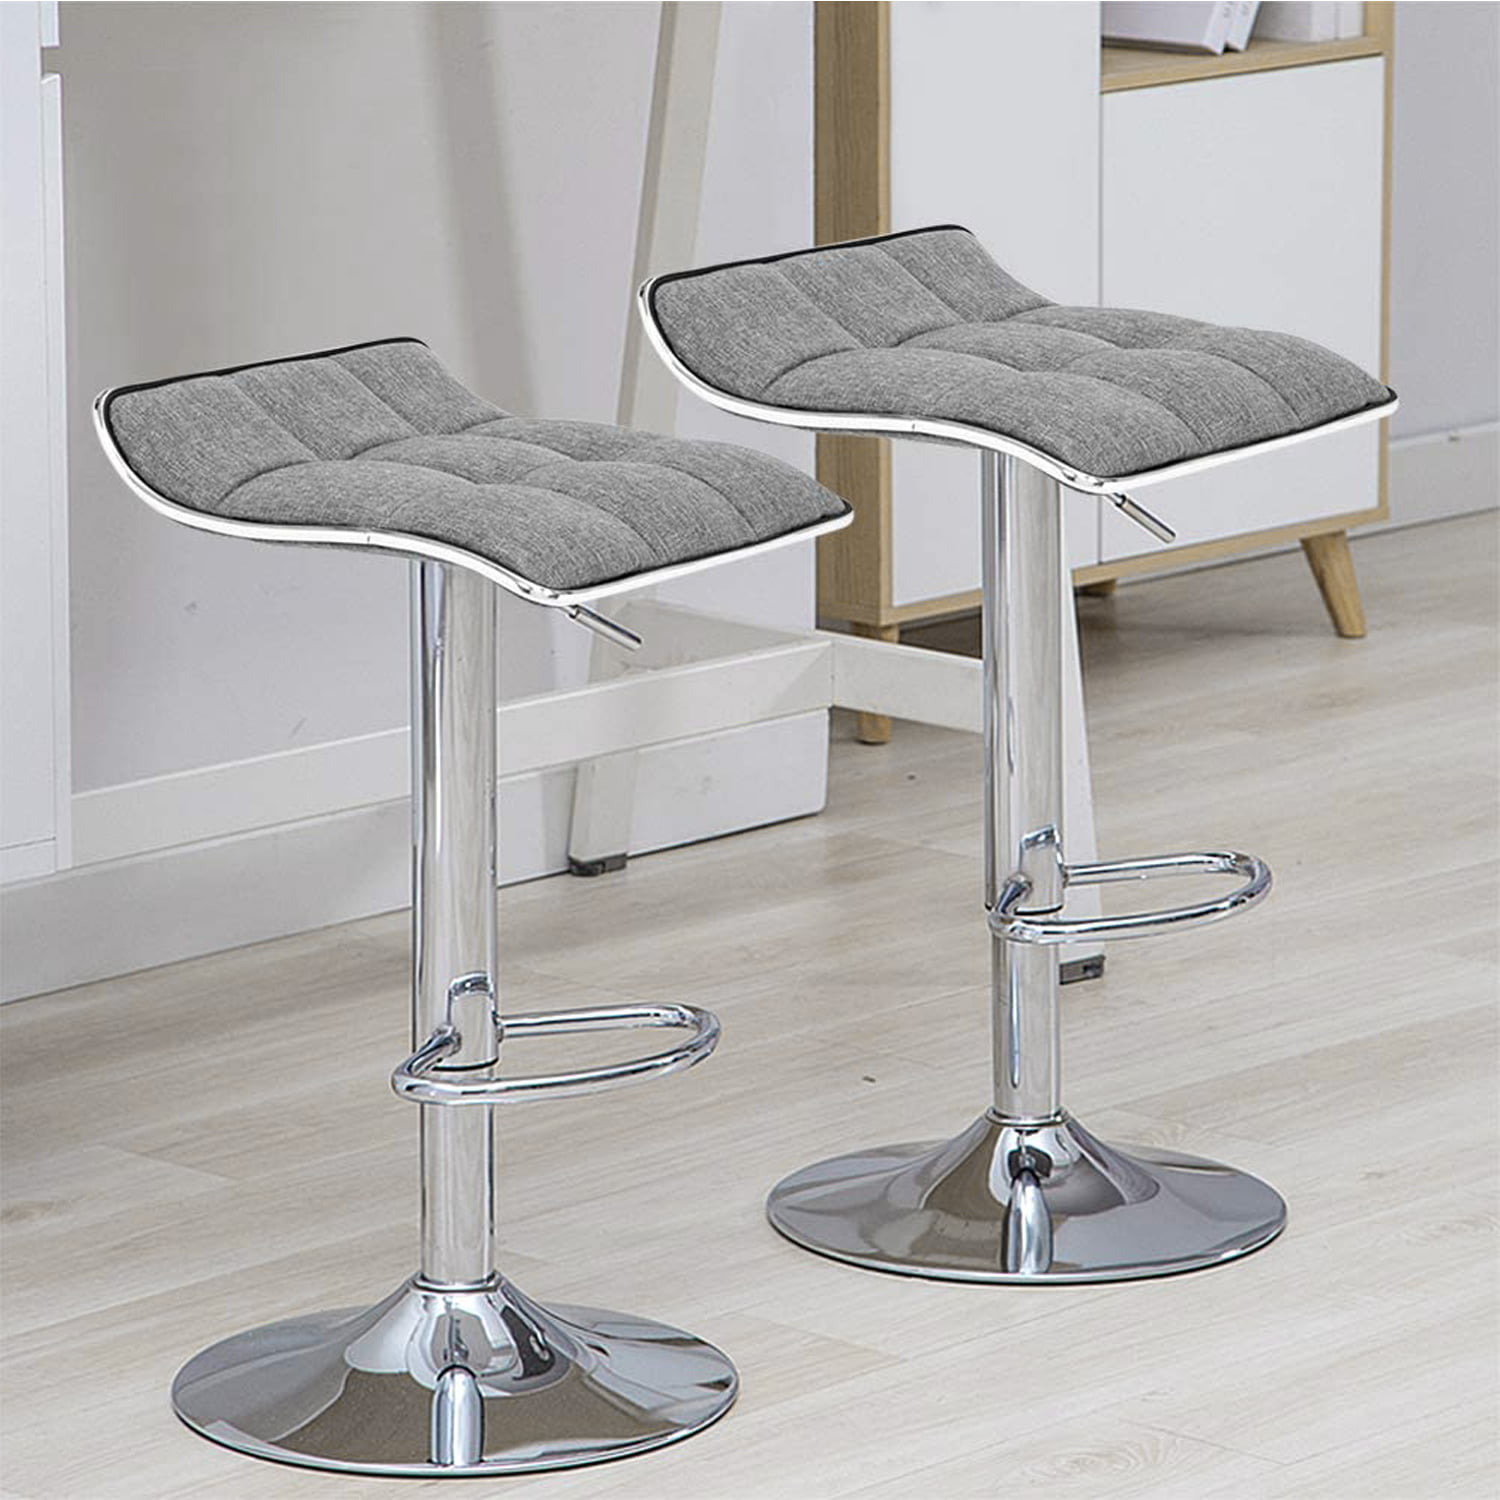 Set of 2 Bar Stools Adjustable Hydraulic Swivel Dining Counter Chair Pub Kitchen 